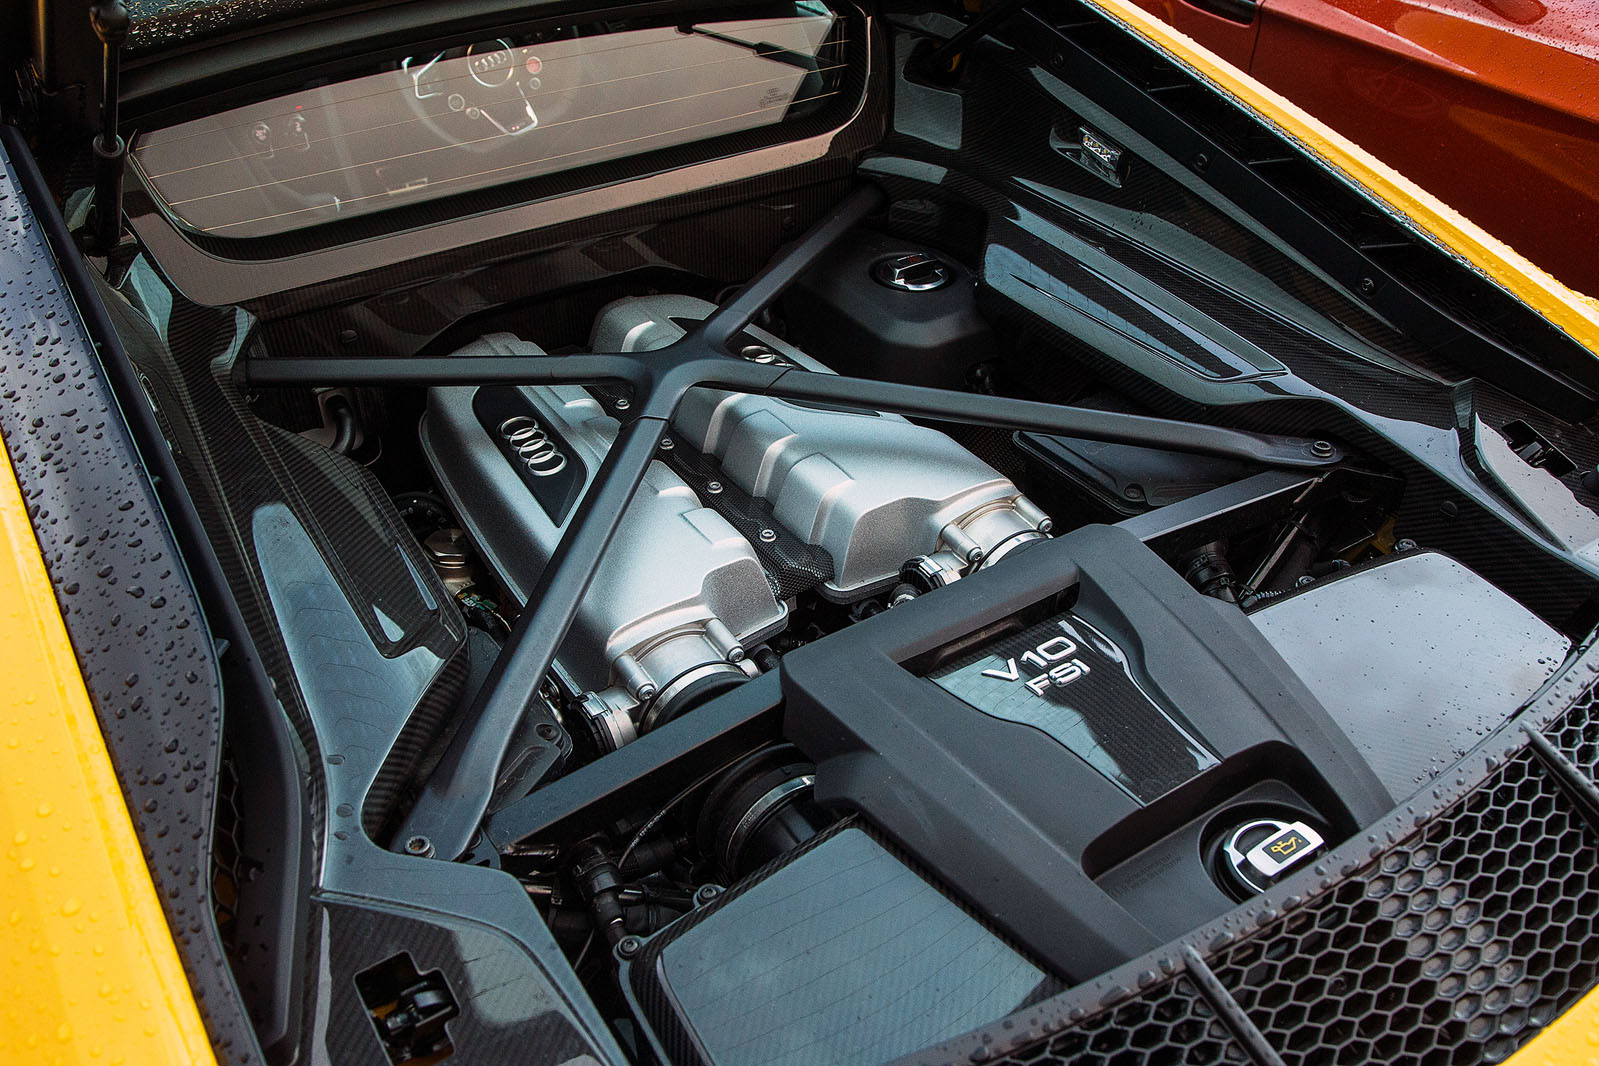 The 5.2-litre V10 engine in the Audi R8